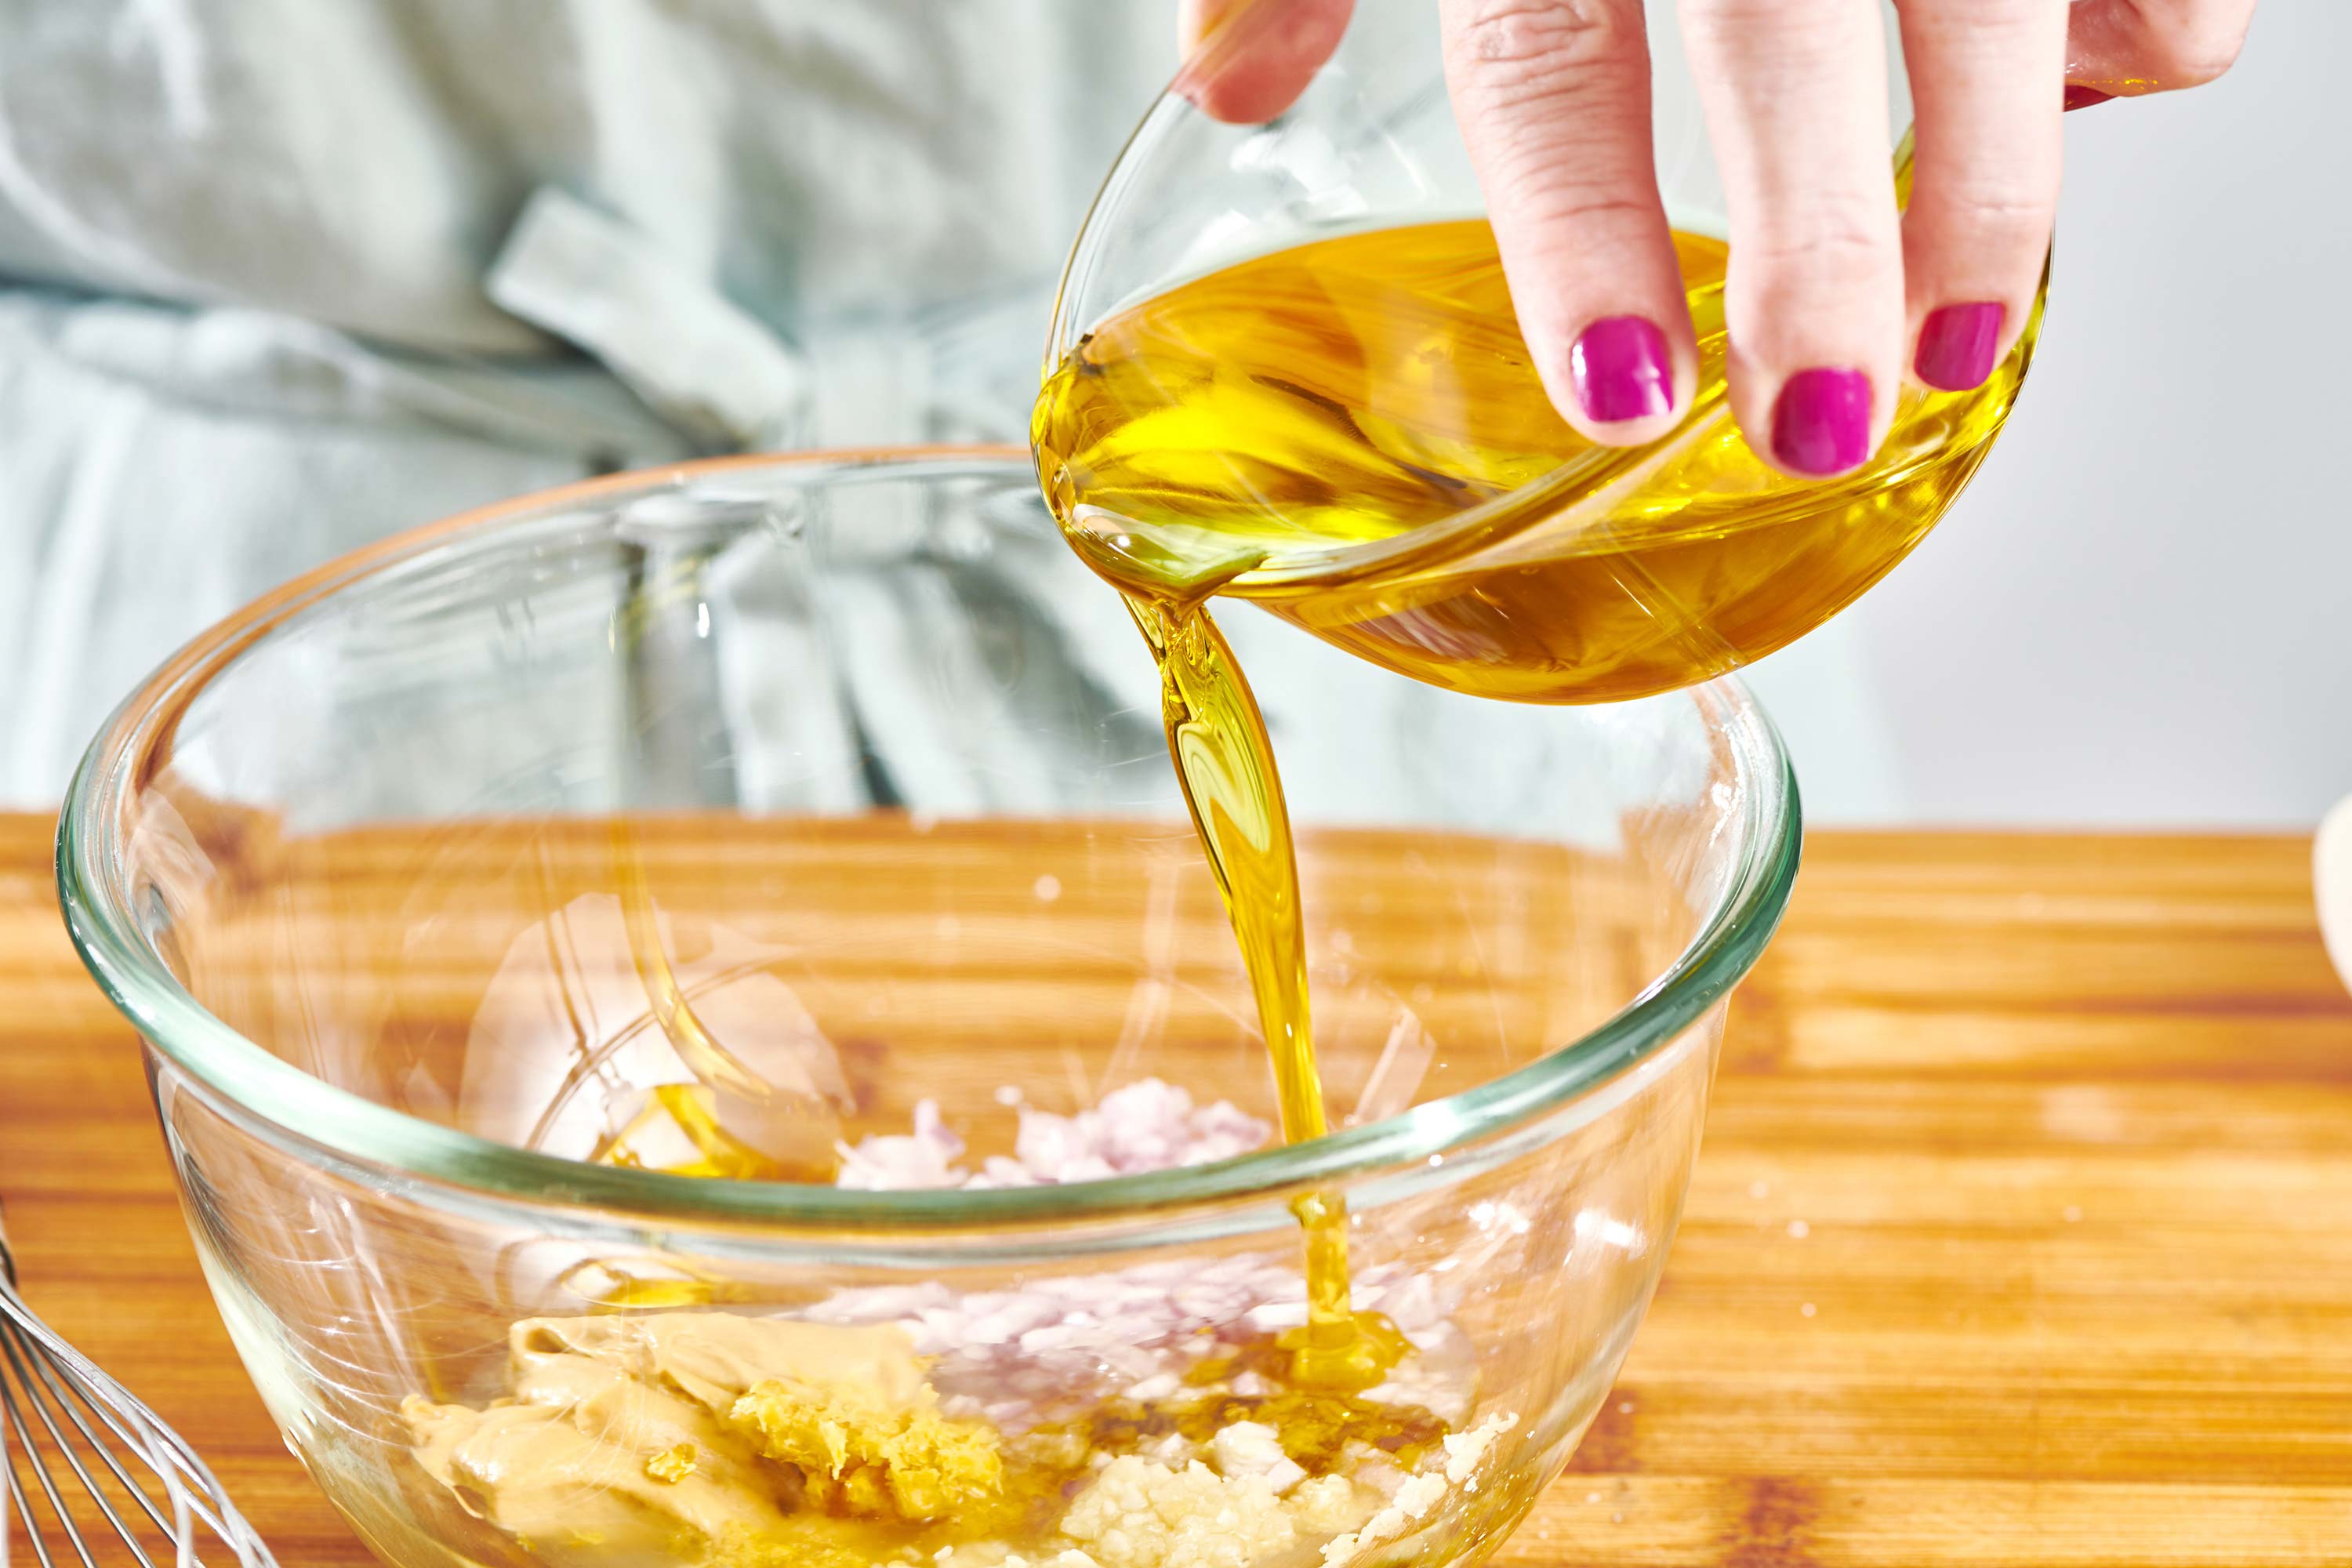 Woman pouring olive oil into bowl of Lemon Garlic Chicken Marinade.